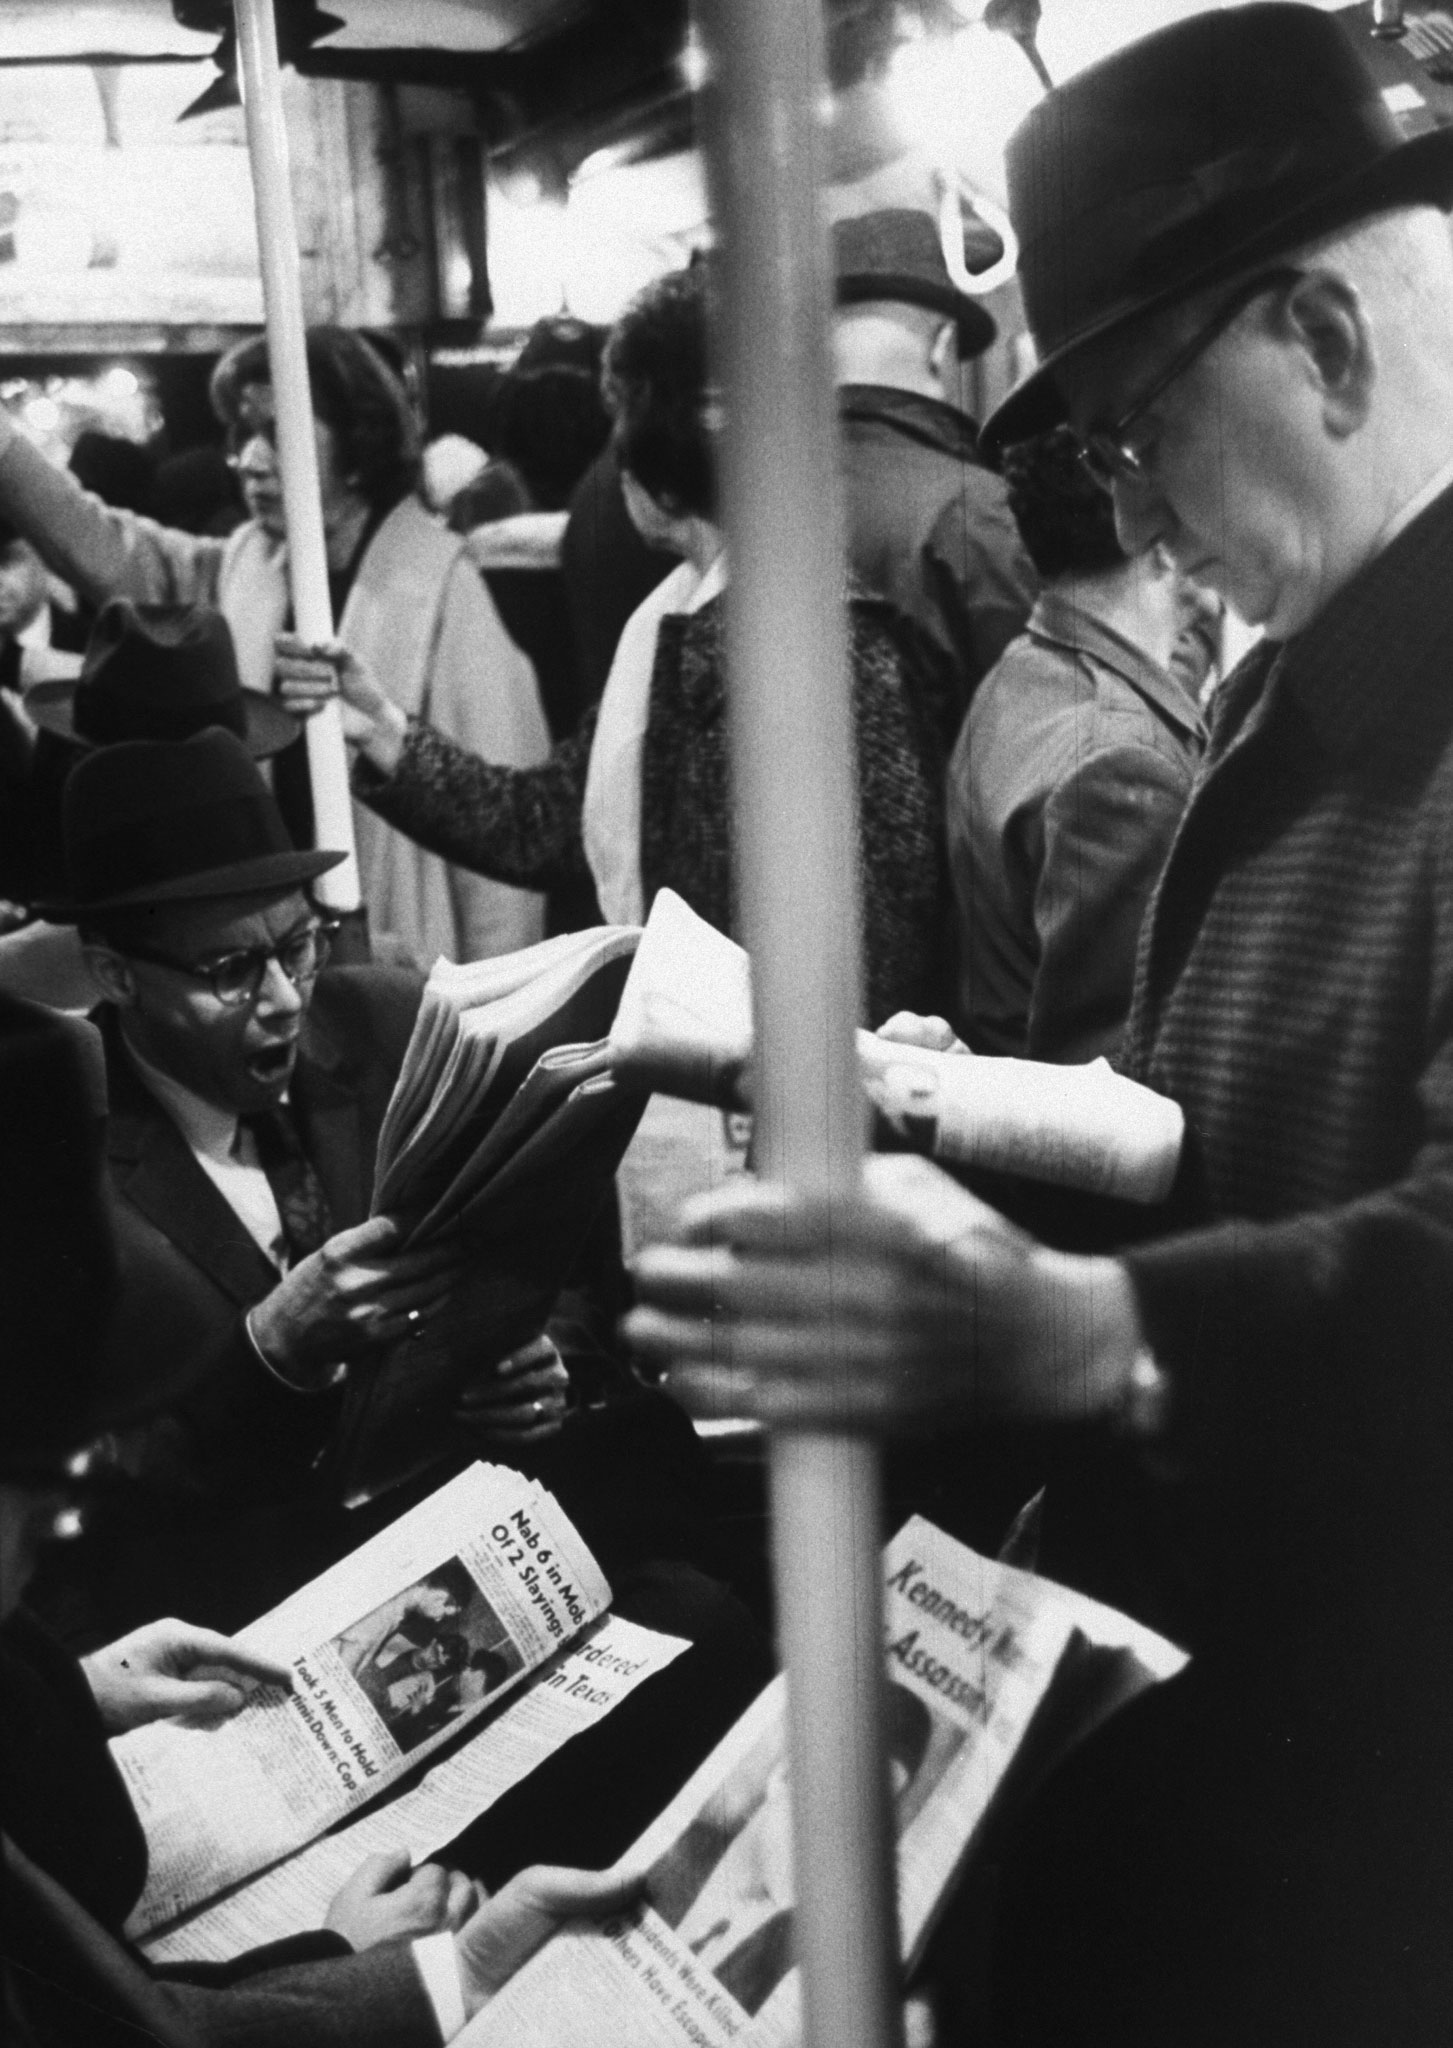 Commuters reading of John F. Kennedy's assassination on the New York subway, November 1963.